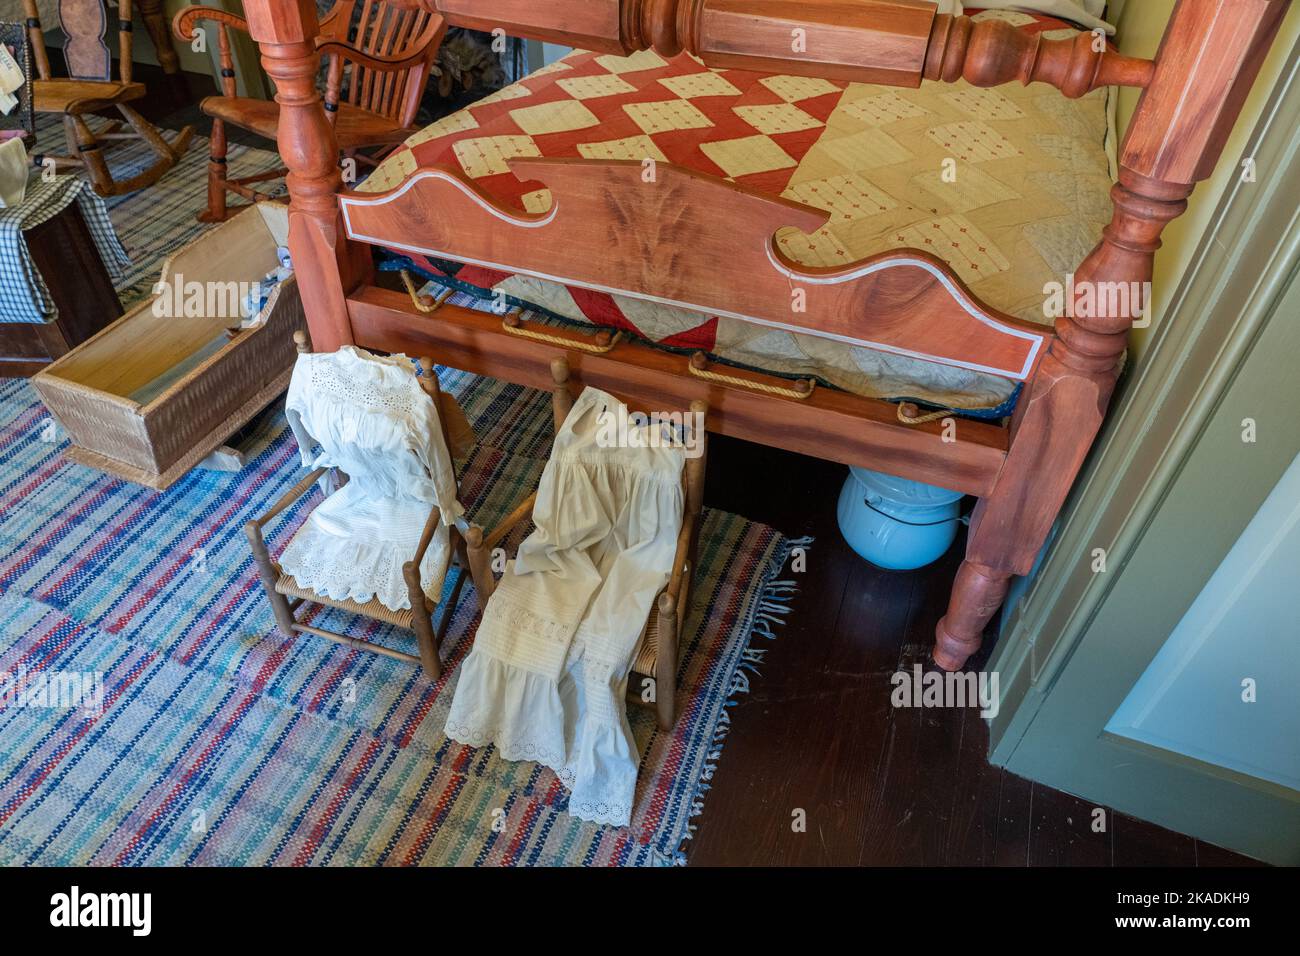 Antique furnishings including children's clothing a lodging room of the Cove Creek Ranch Fort, built in 1867, Cove Fort, Utah.  Note the chamber pot u Stock Photo